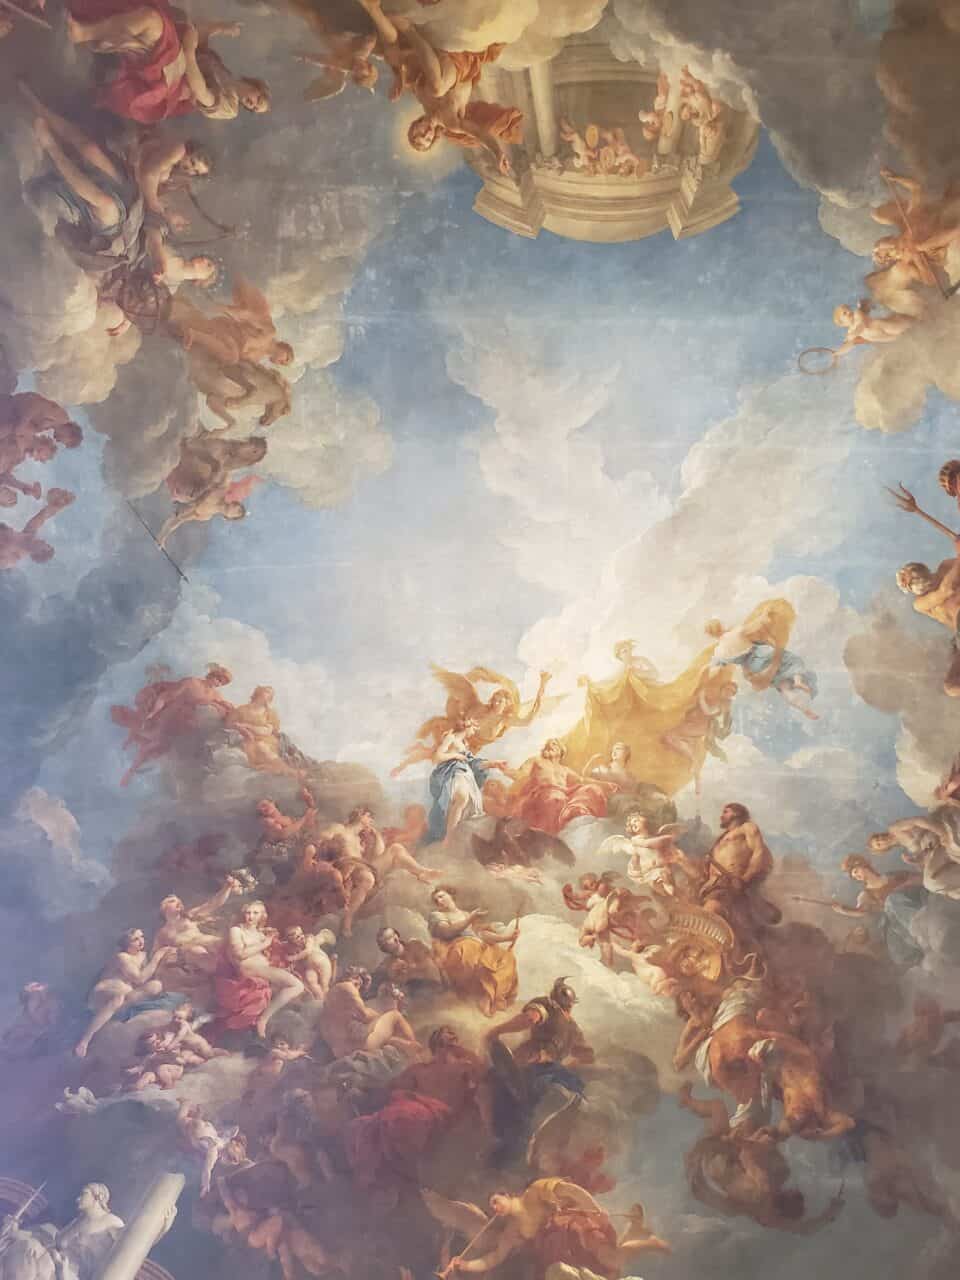 Ceiling in one of the rooms in the Palace of Versailles